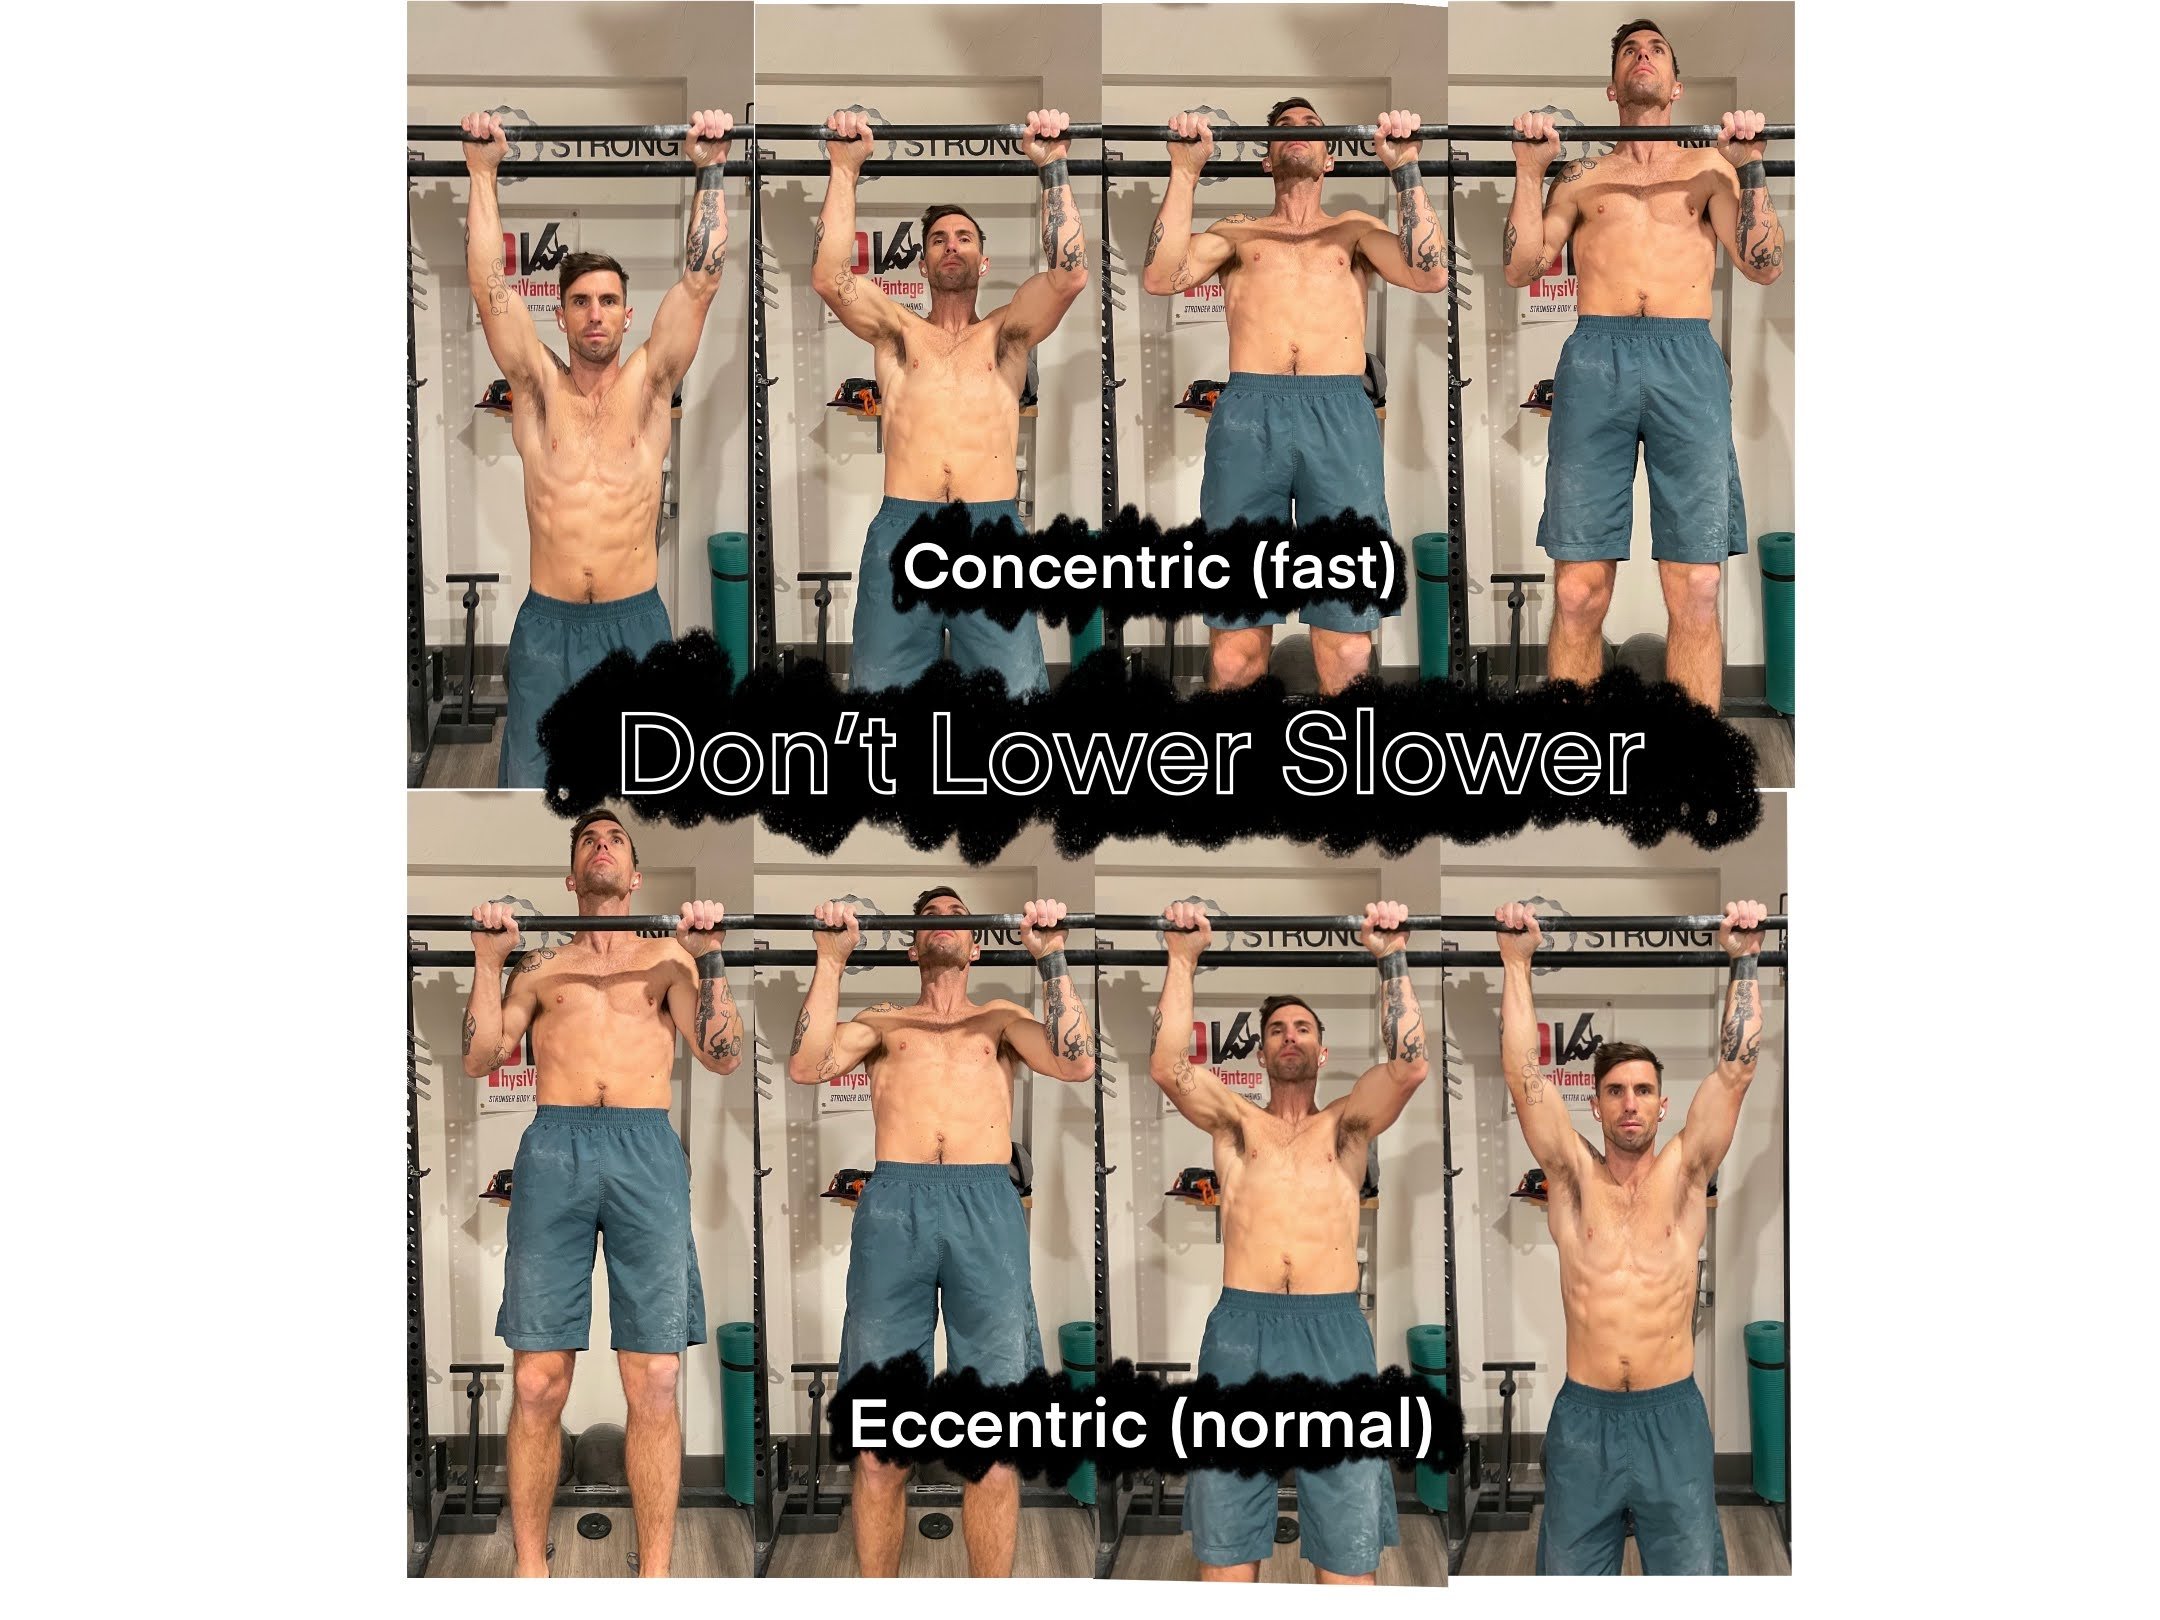 Eccentric exercise: Benefits, examples, and how to